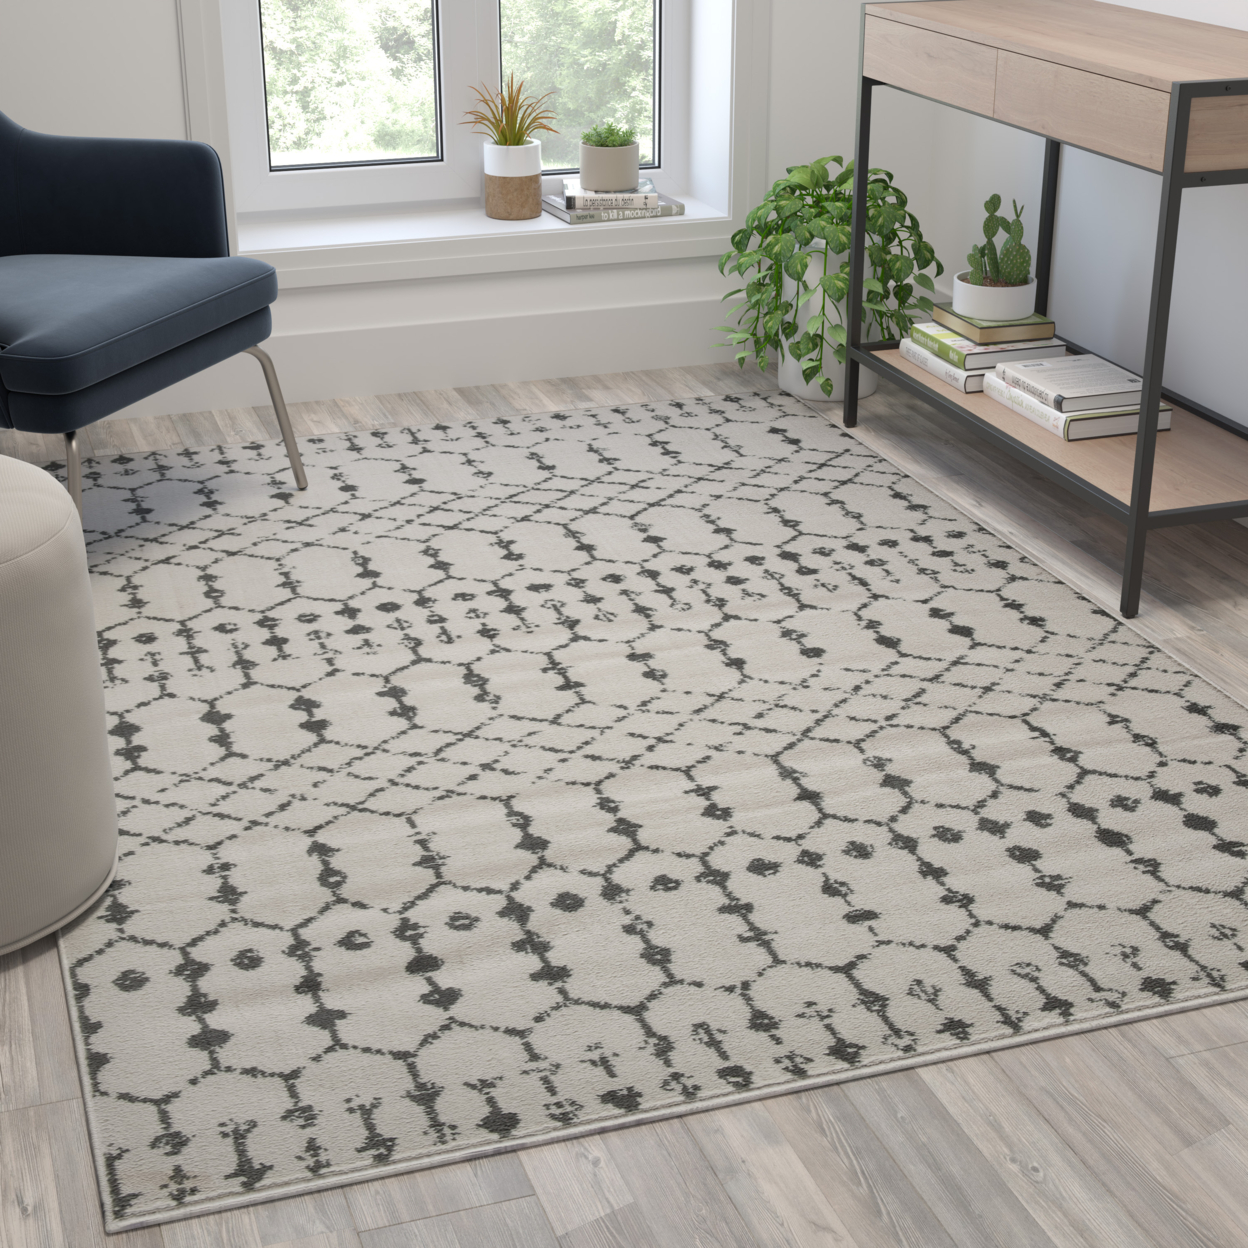 Geometric Bohemian Low Pile Rug - 5' X 7' -Ivory And Gray Polyester